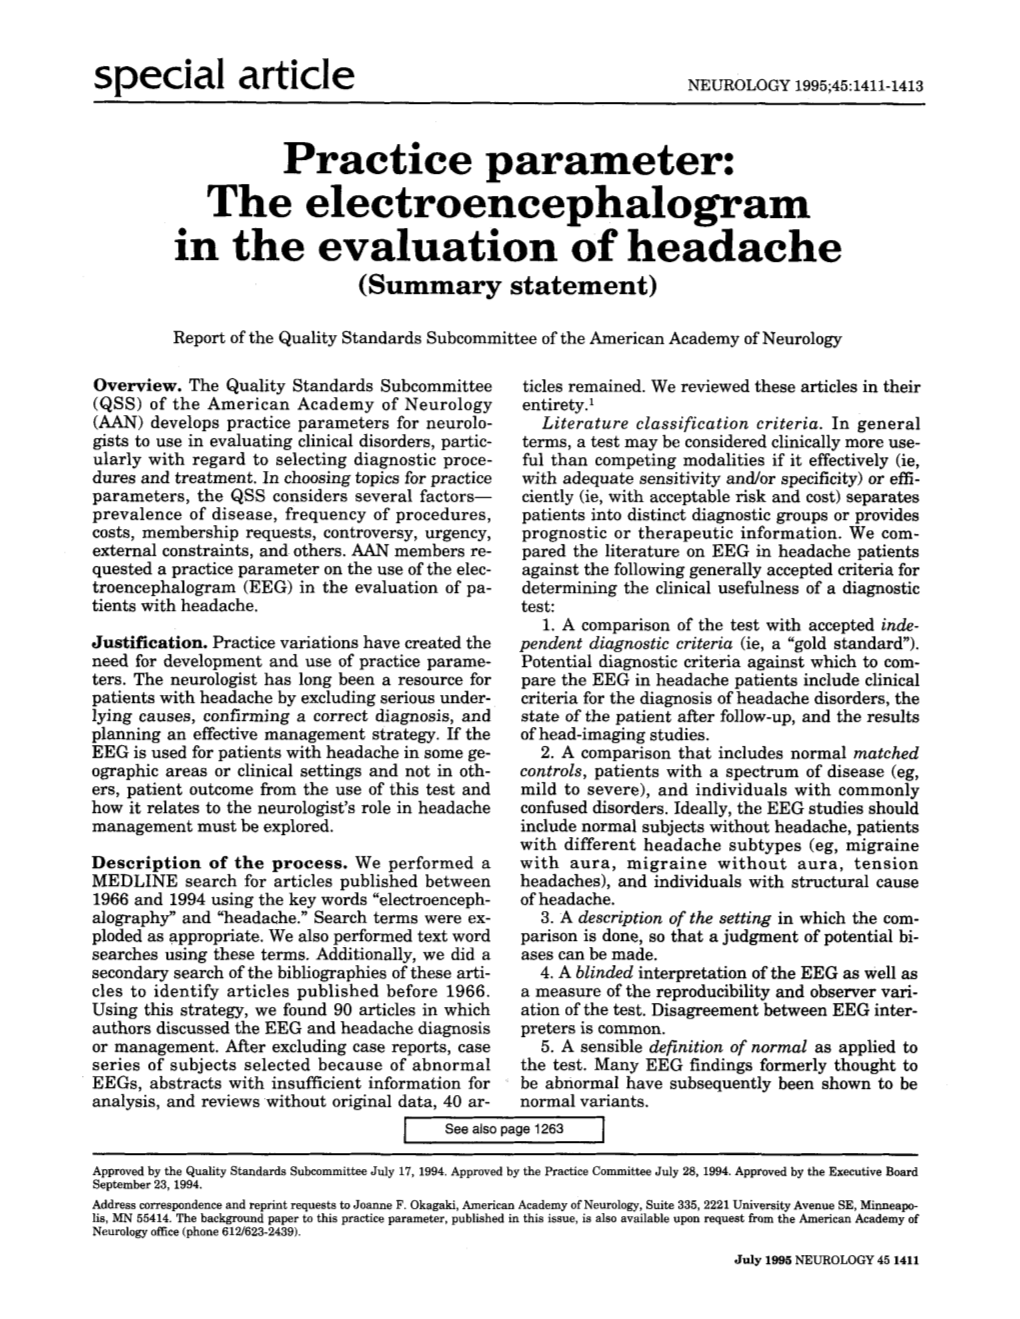 Special Article NEUROLOGY 1995;45:1411-1413 Practice Parameter: the Electroencephalogram in the Evaluation of Headache (Summary Statement)